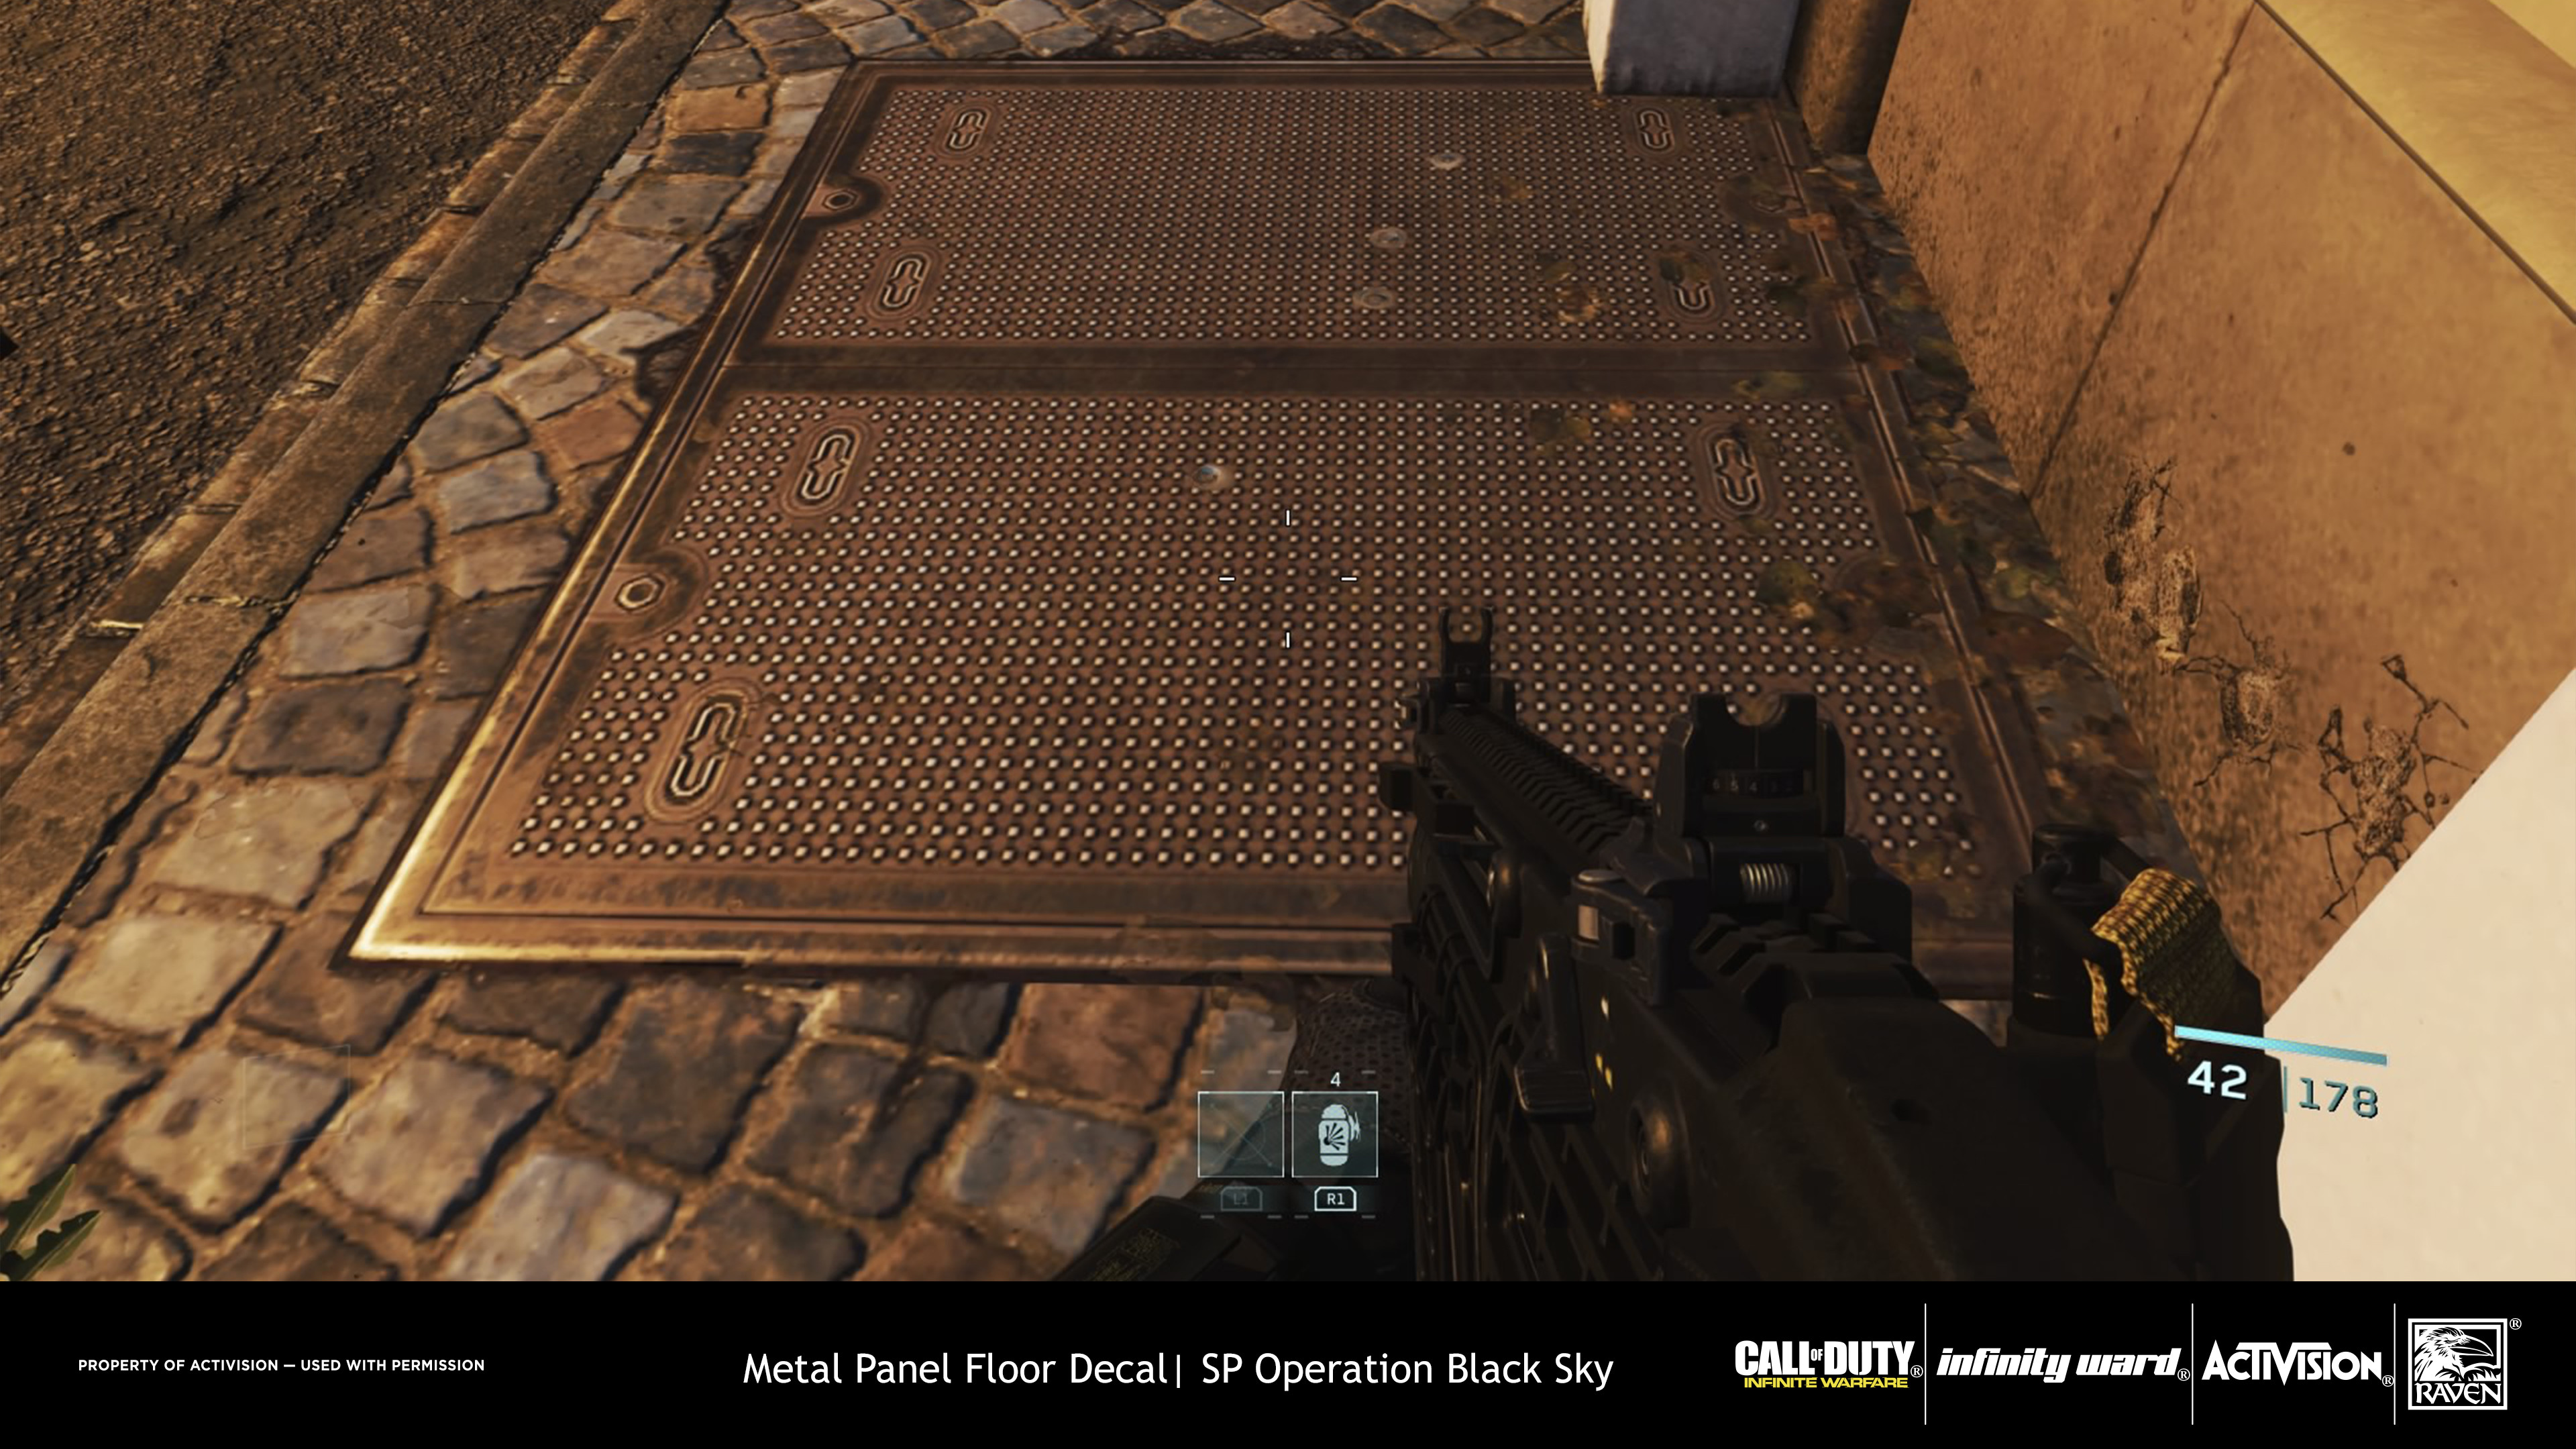 Dear Infinity Ward, please implement higher resolution textures as